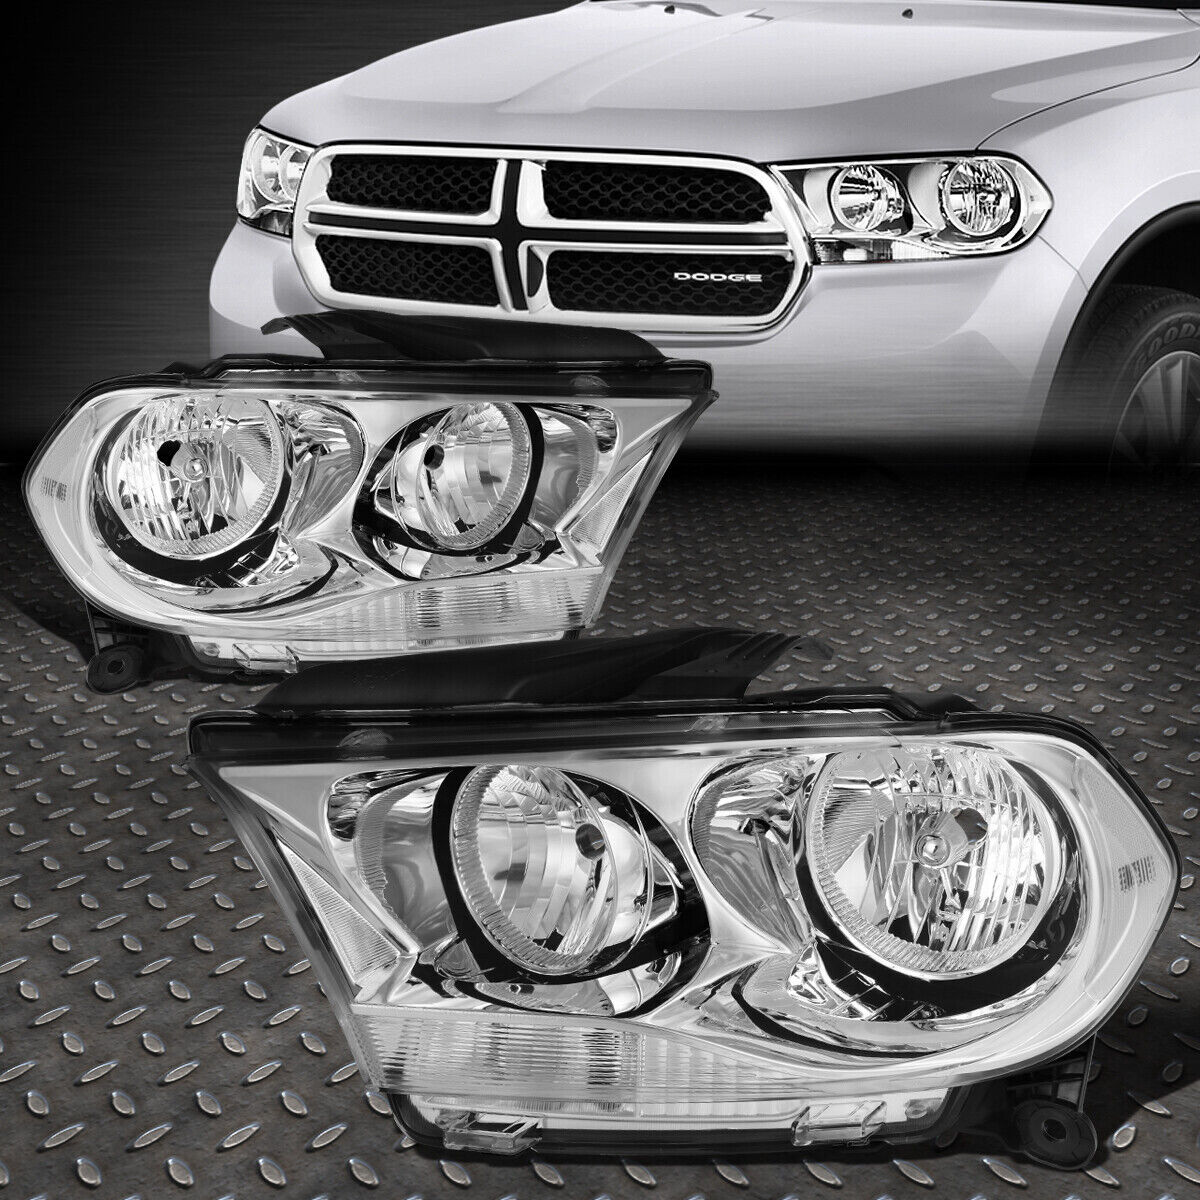 FOR 11-13 DODGE DURANGO CHROME HOUSING CLEAR CORNER HEADLIGHT REPLACEMENT LAMPS